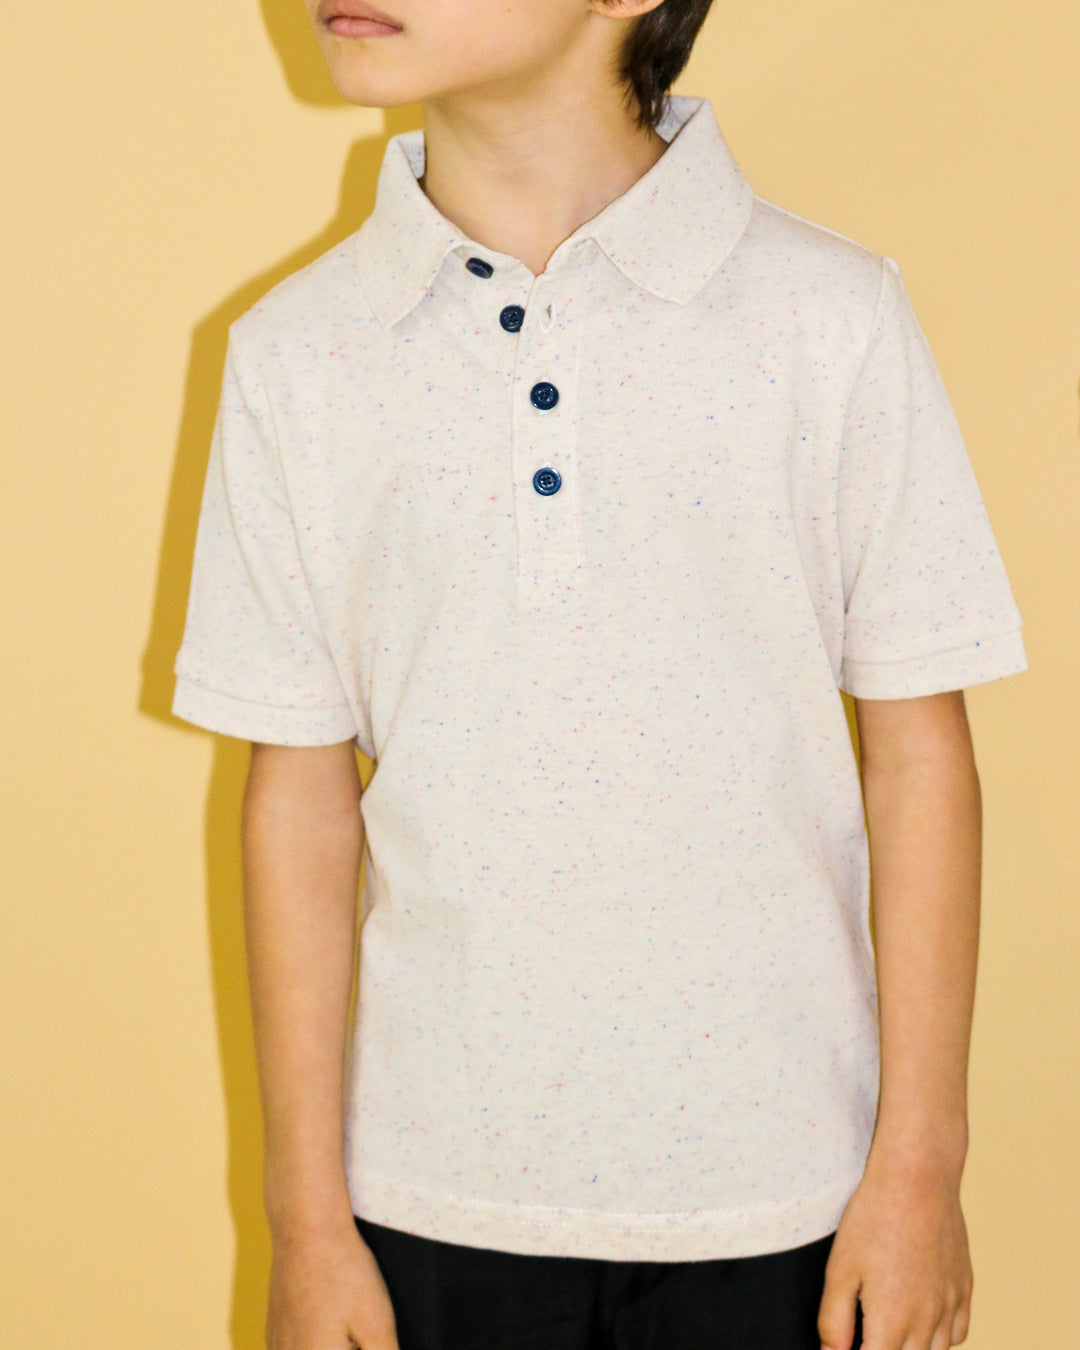 Beige Colored Speckled Polo - Short Sleeve